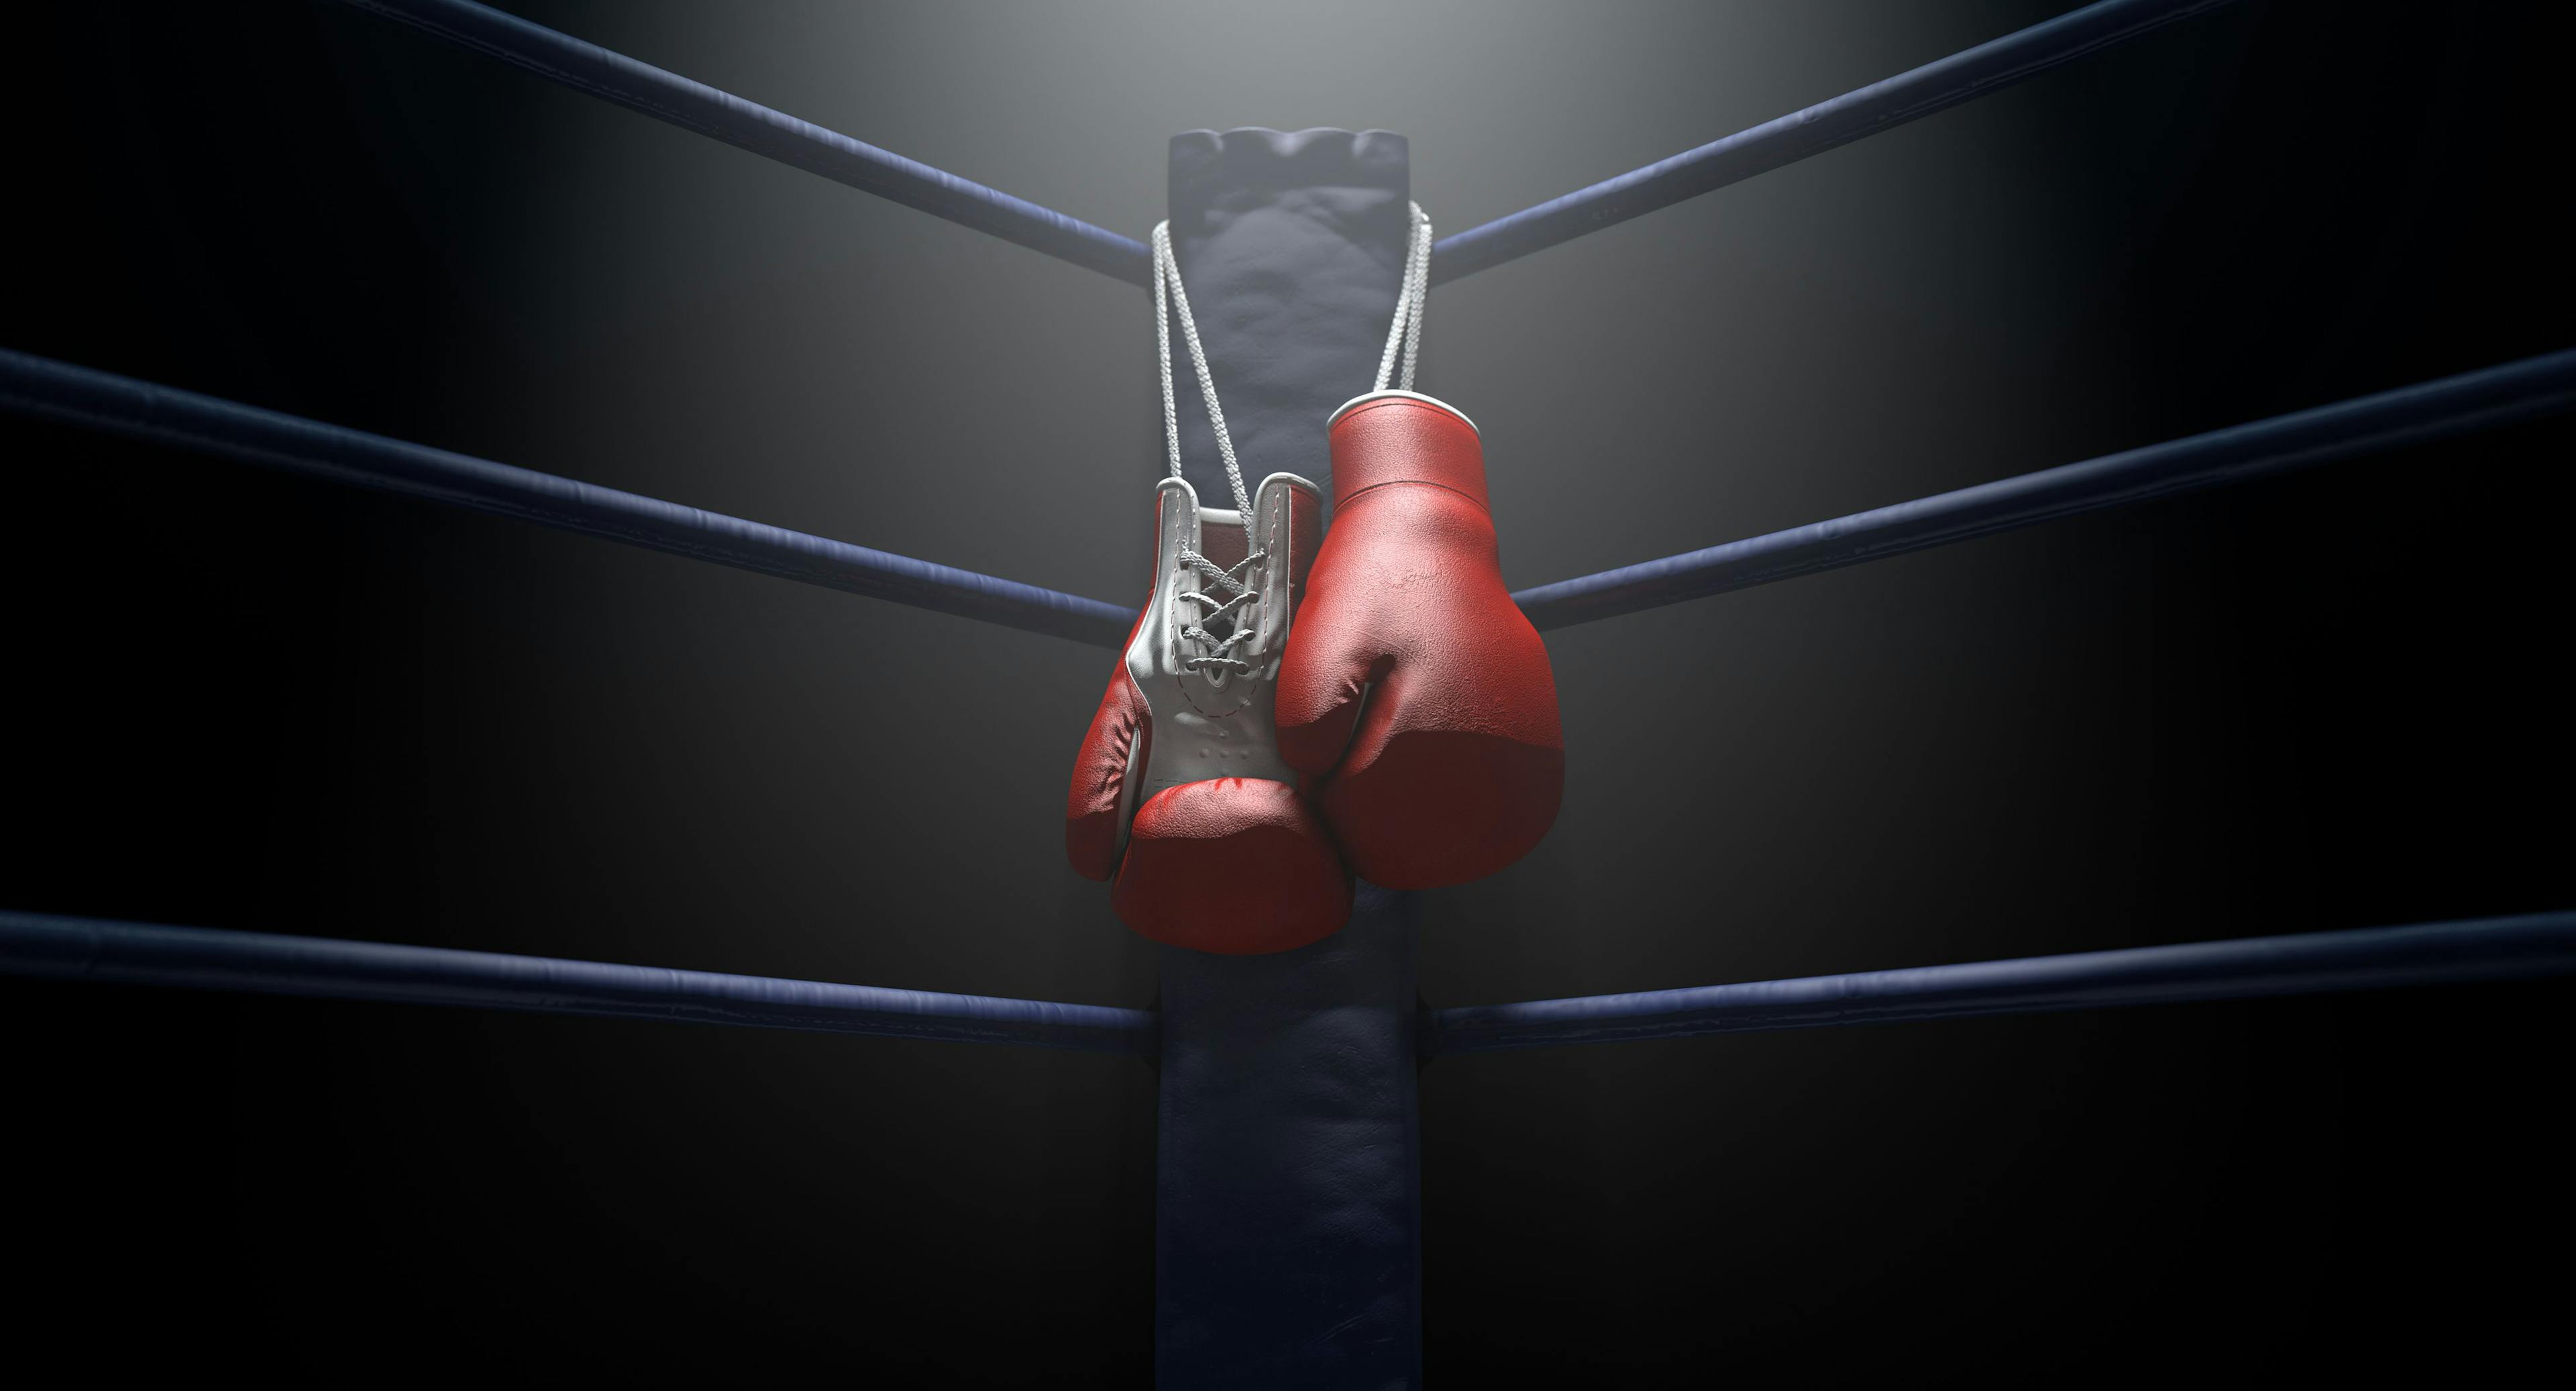 Boxing gloves and boxing corner | Image credit: © alswart © stock.adobe.com